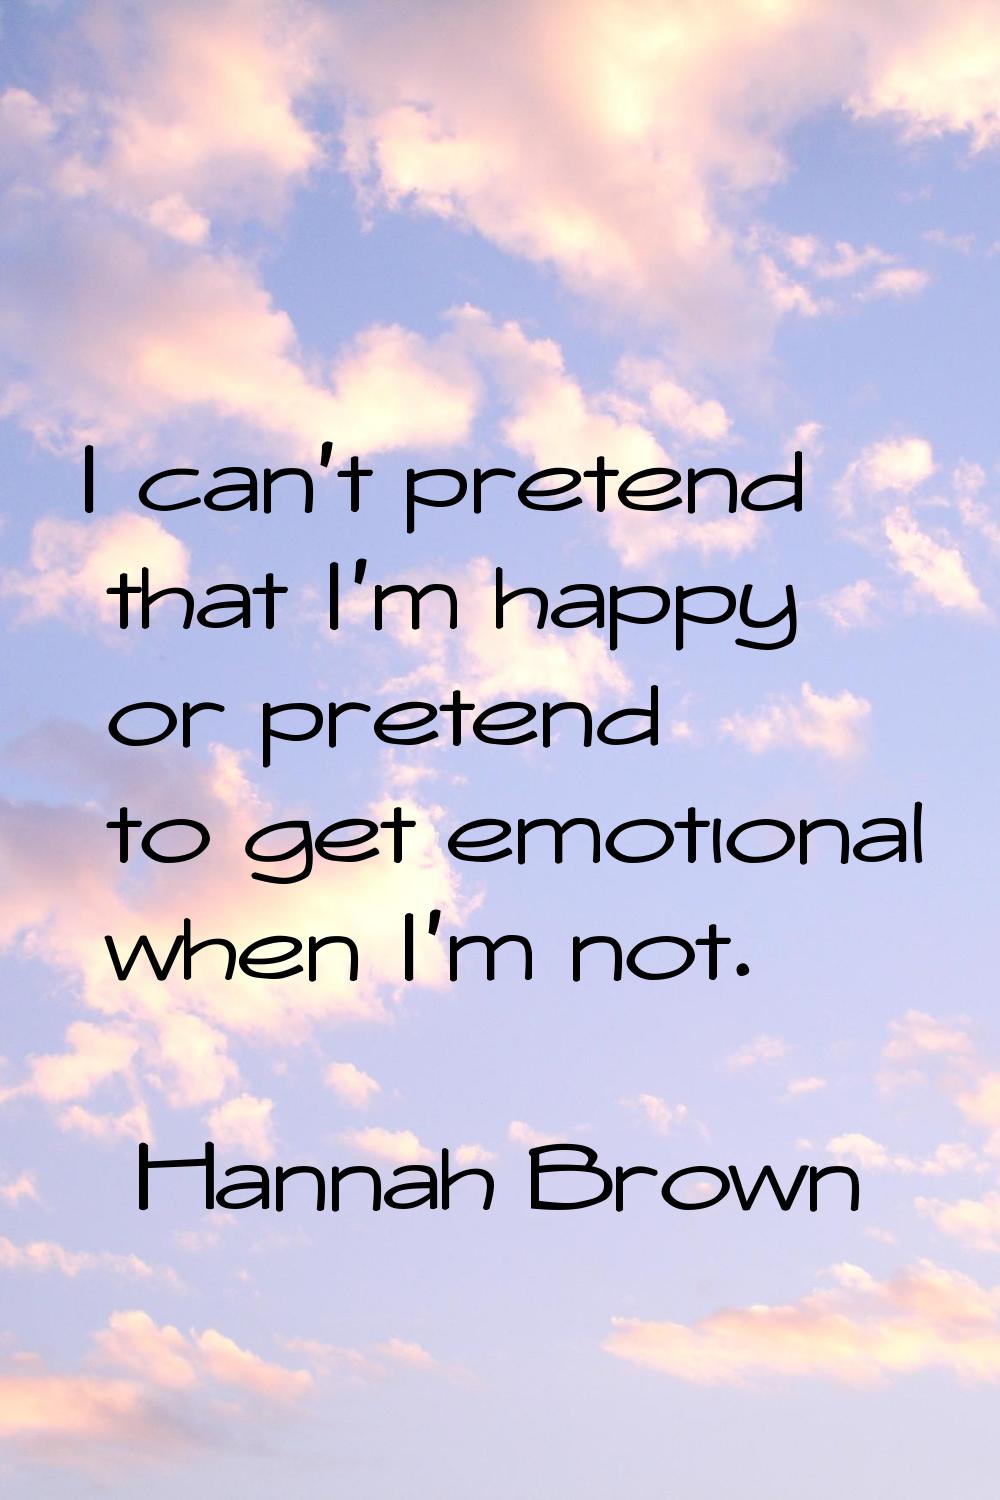 I can't pretend that I'm happy or pretend to get emotional when I'm not.